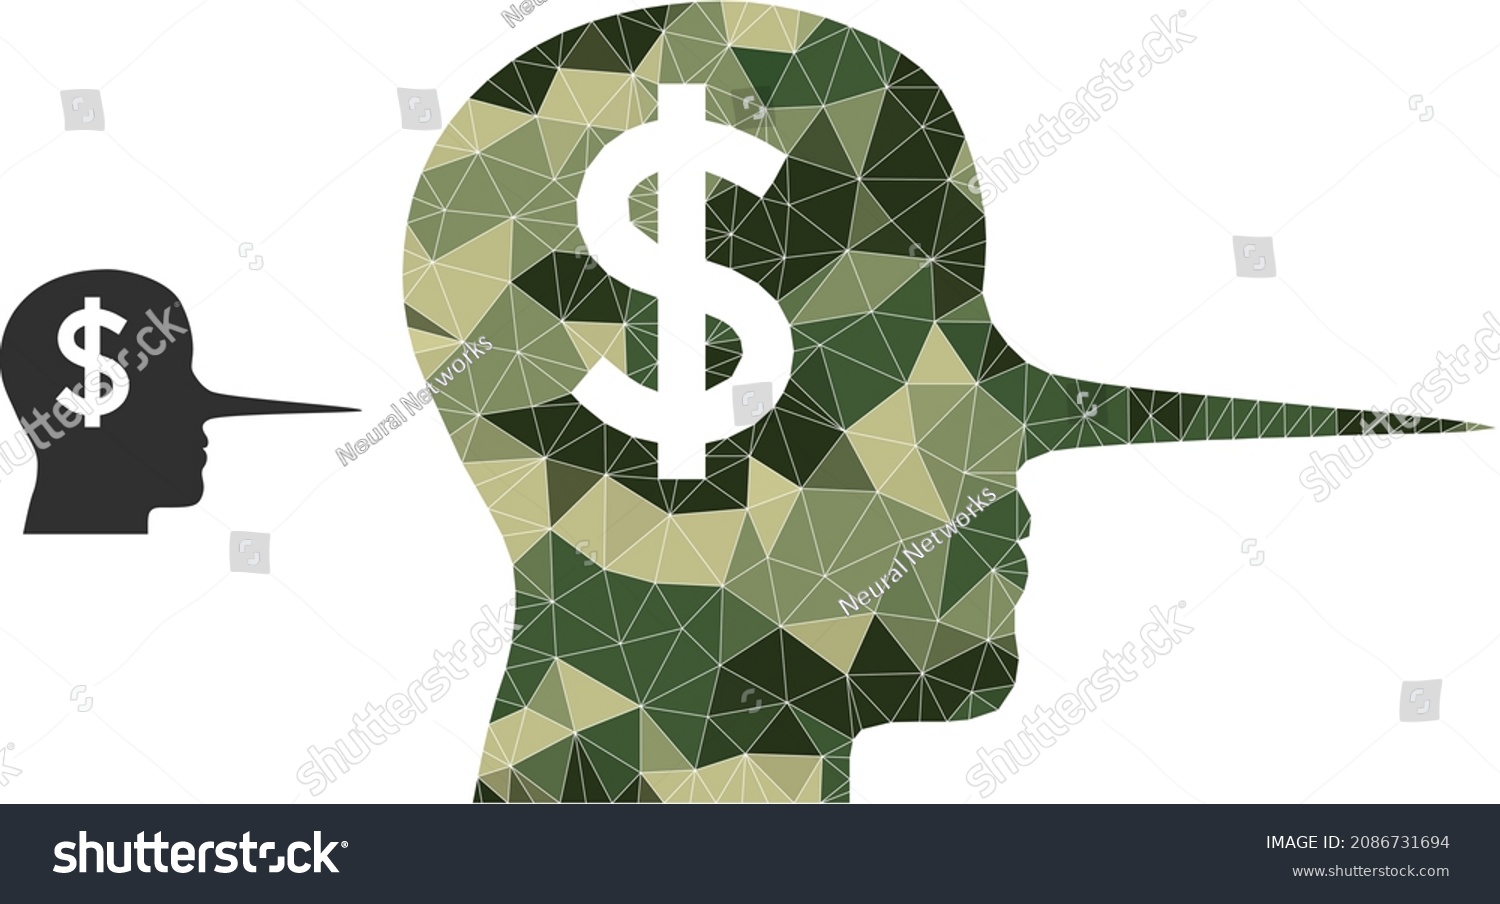 SVG of Camouflage low-poly mosaic financial liar icon. Low-poly financial liar icon combined with scattered camouflage color triangles. Vector financial liar icon in camouflage army style. svg